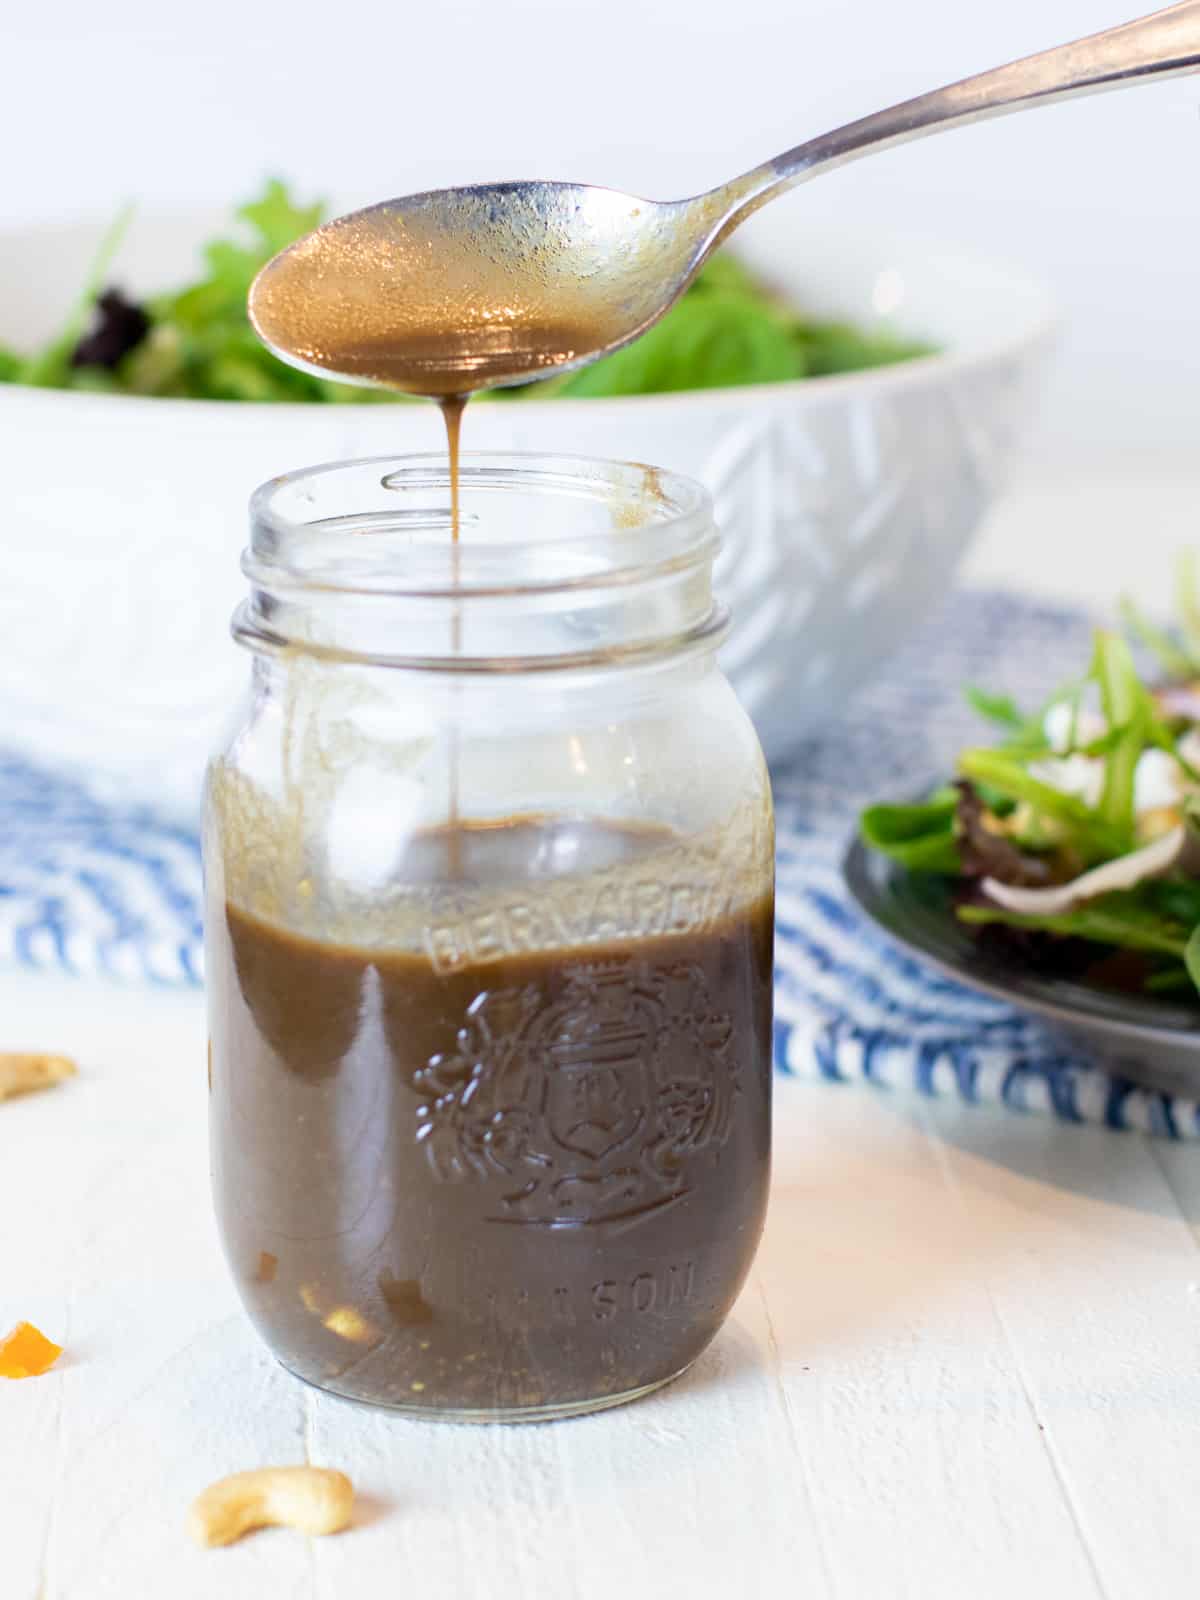 Balsamic dressing being pour from a spoon into a jar filled with more of the dressing.